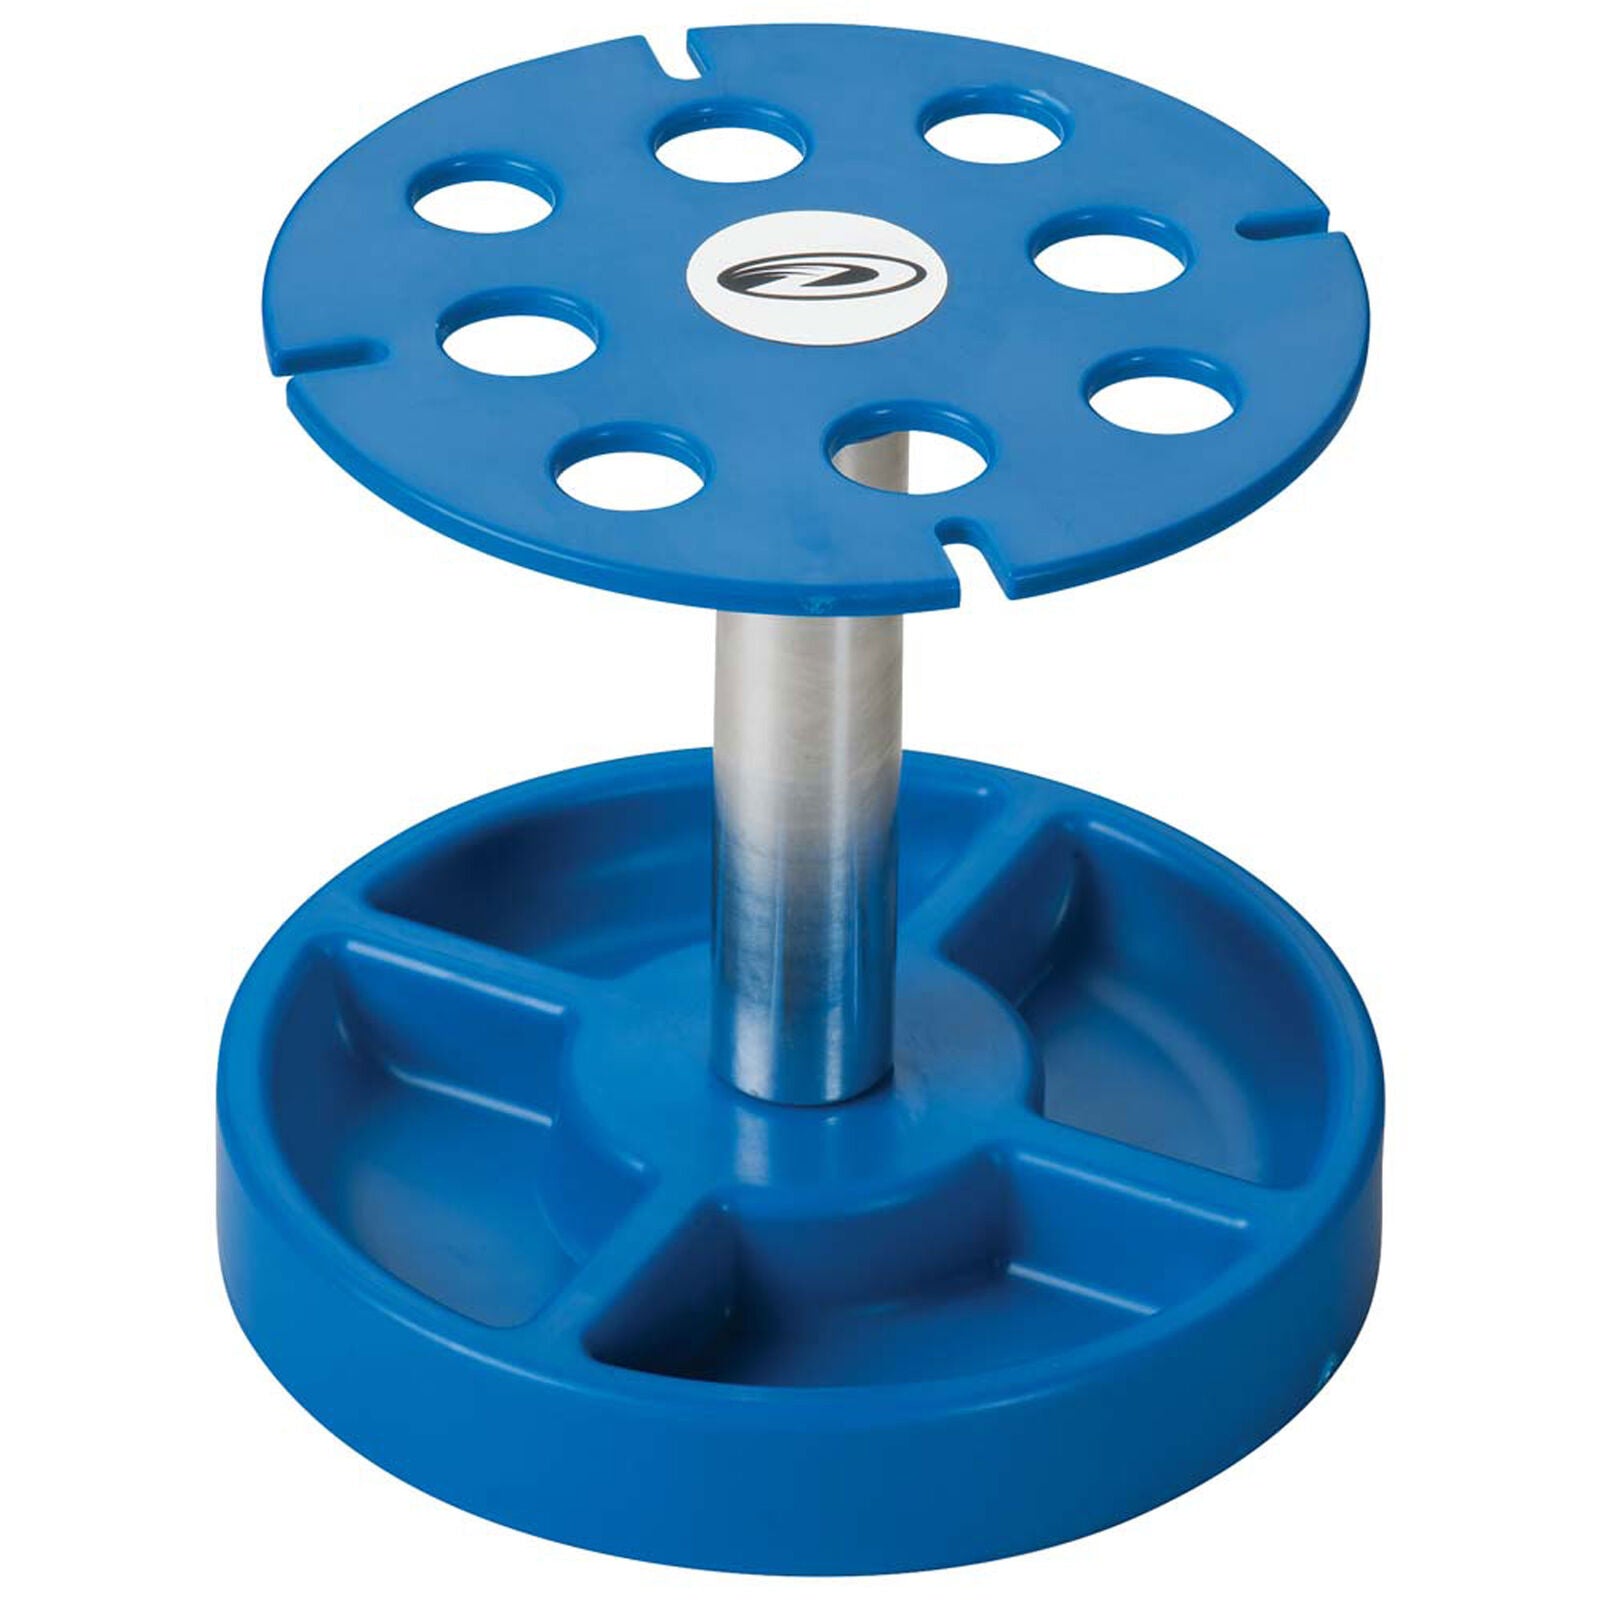 DURATRAX DTXC2385 Pit Tech Deluxe Shock Stand, Blue